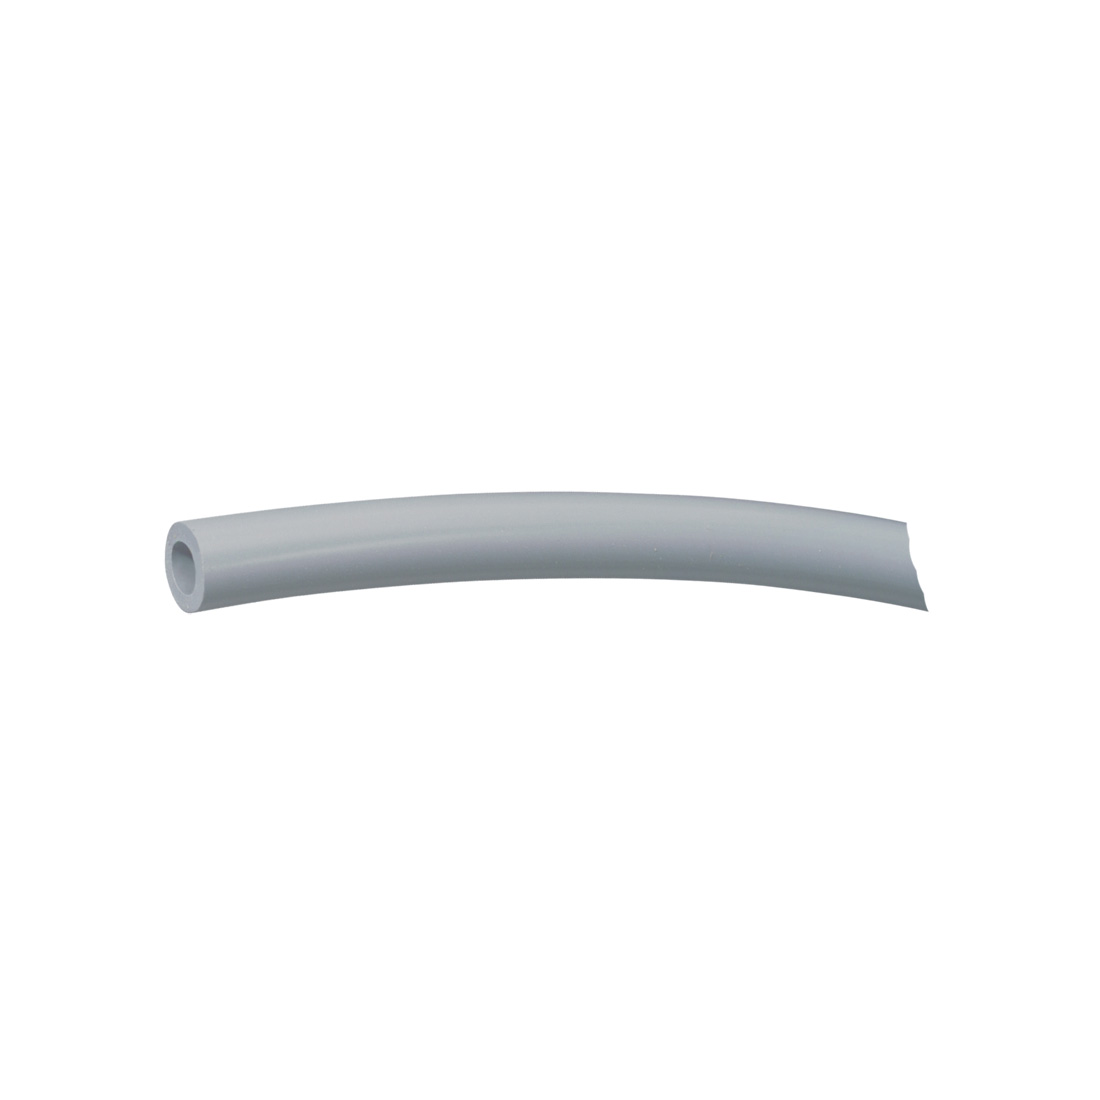 Silicone Surgical Tubing 1/4" Order by the foot - Order By Foot